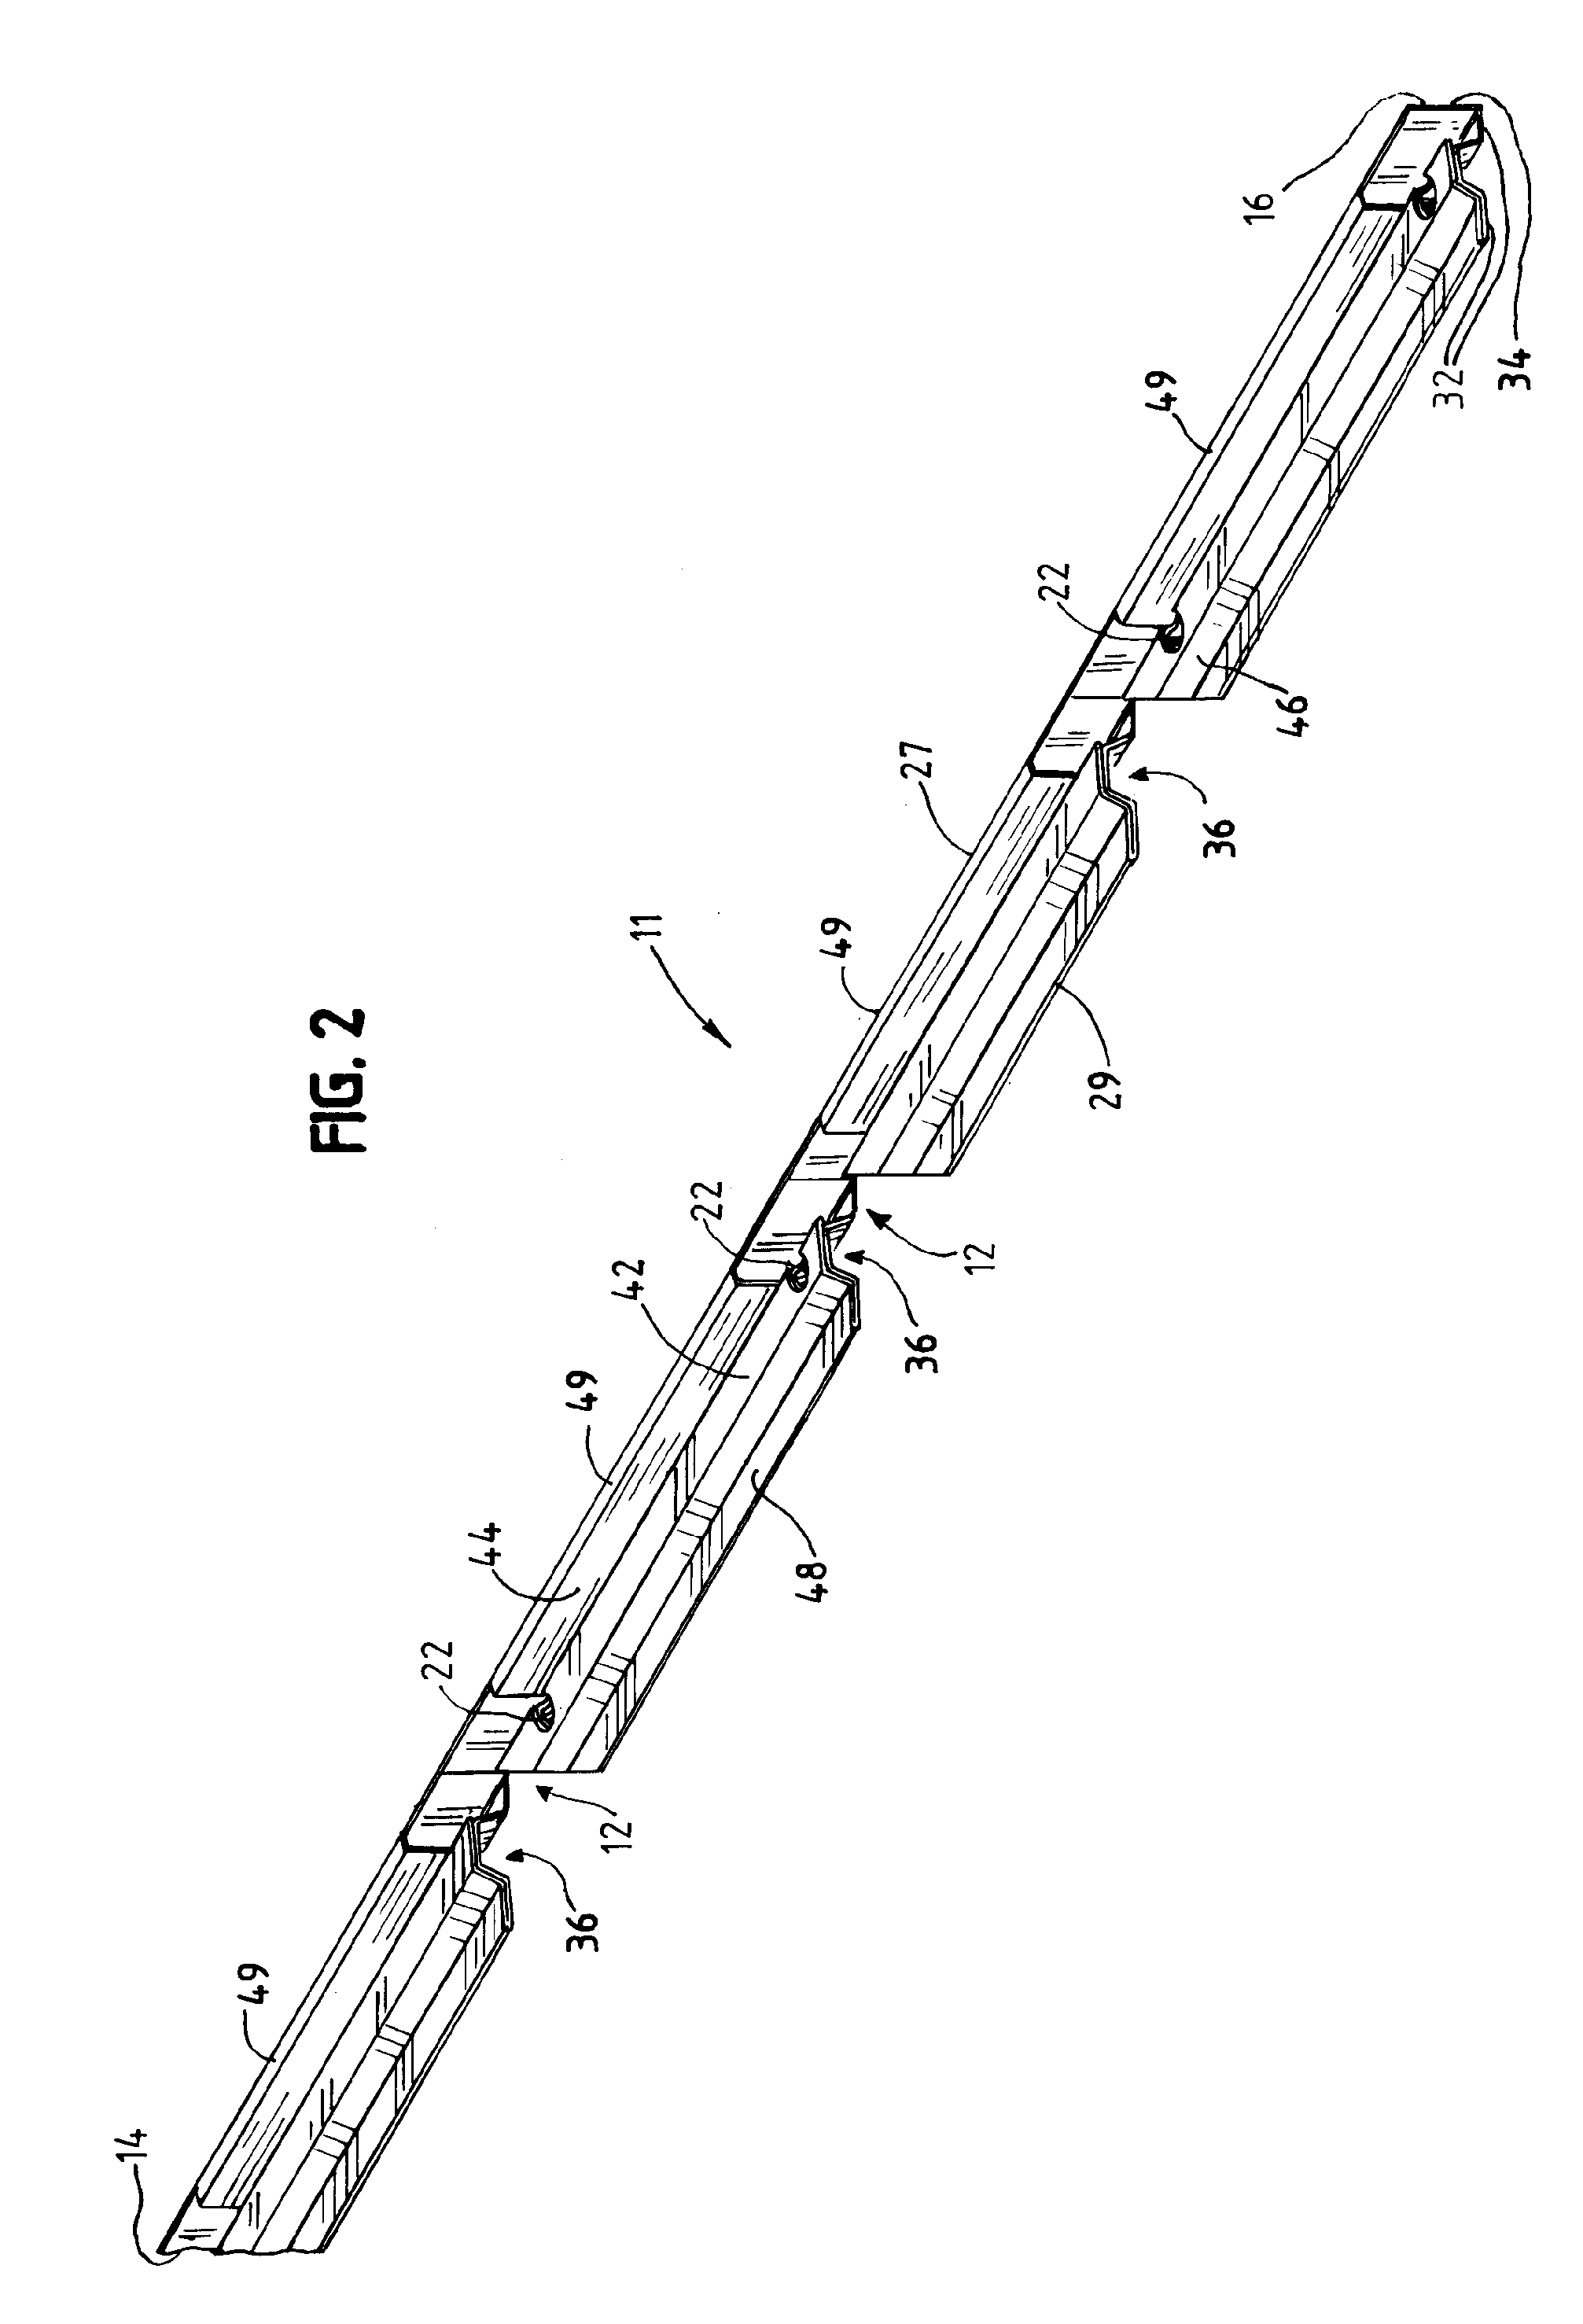 Tubular structure for supporting a product